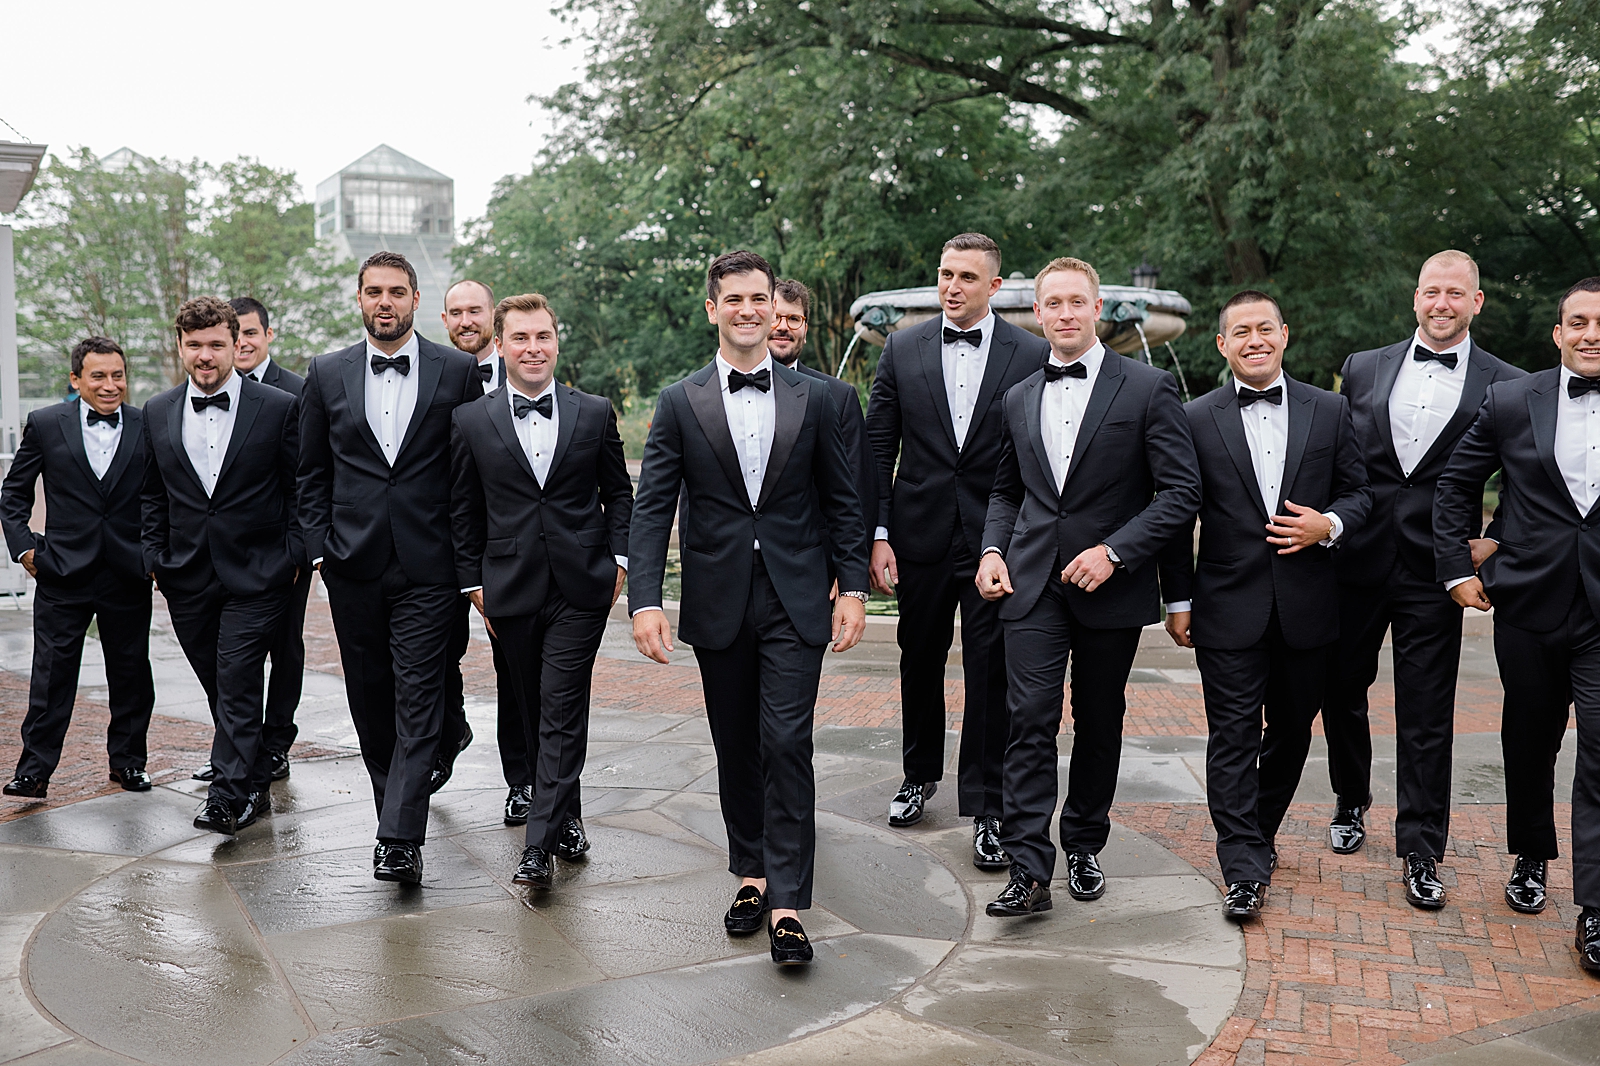 Shot of the groom and his groomsmen smiling for the camera.